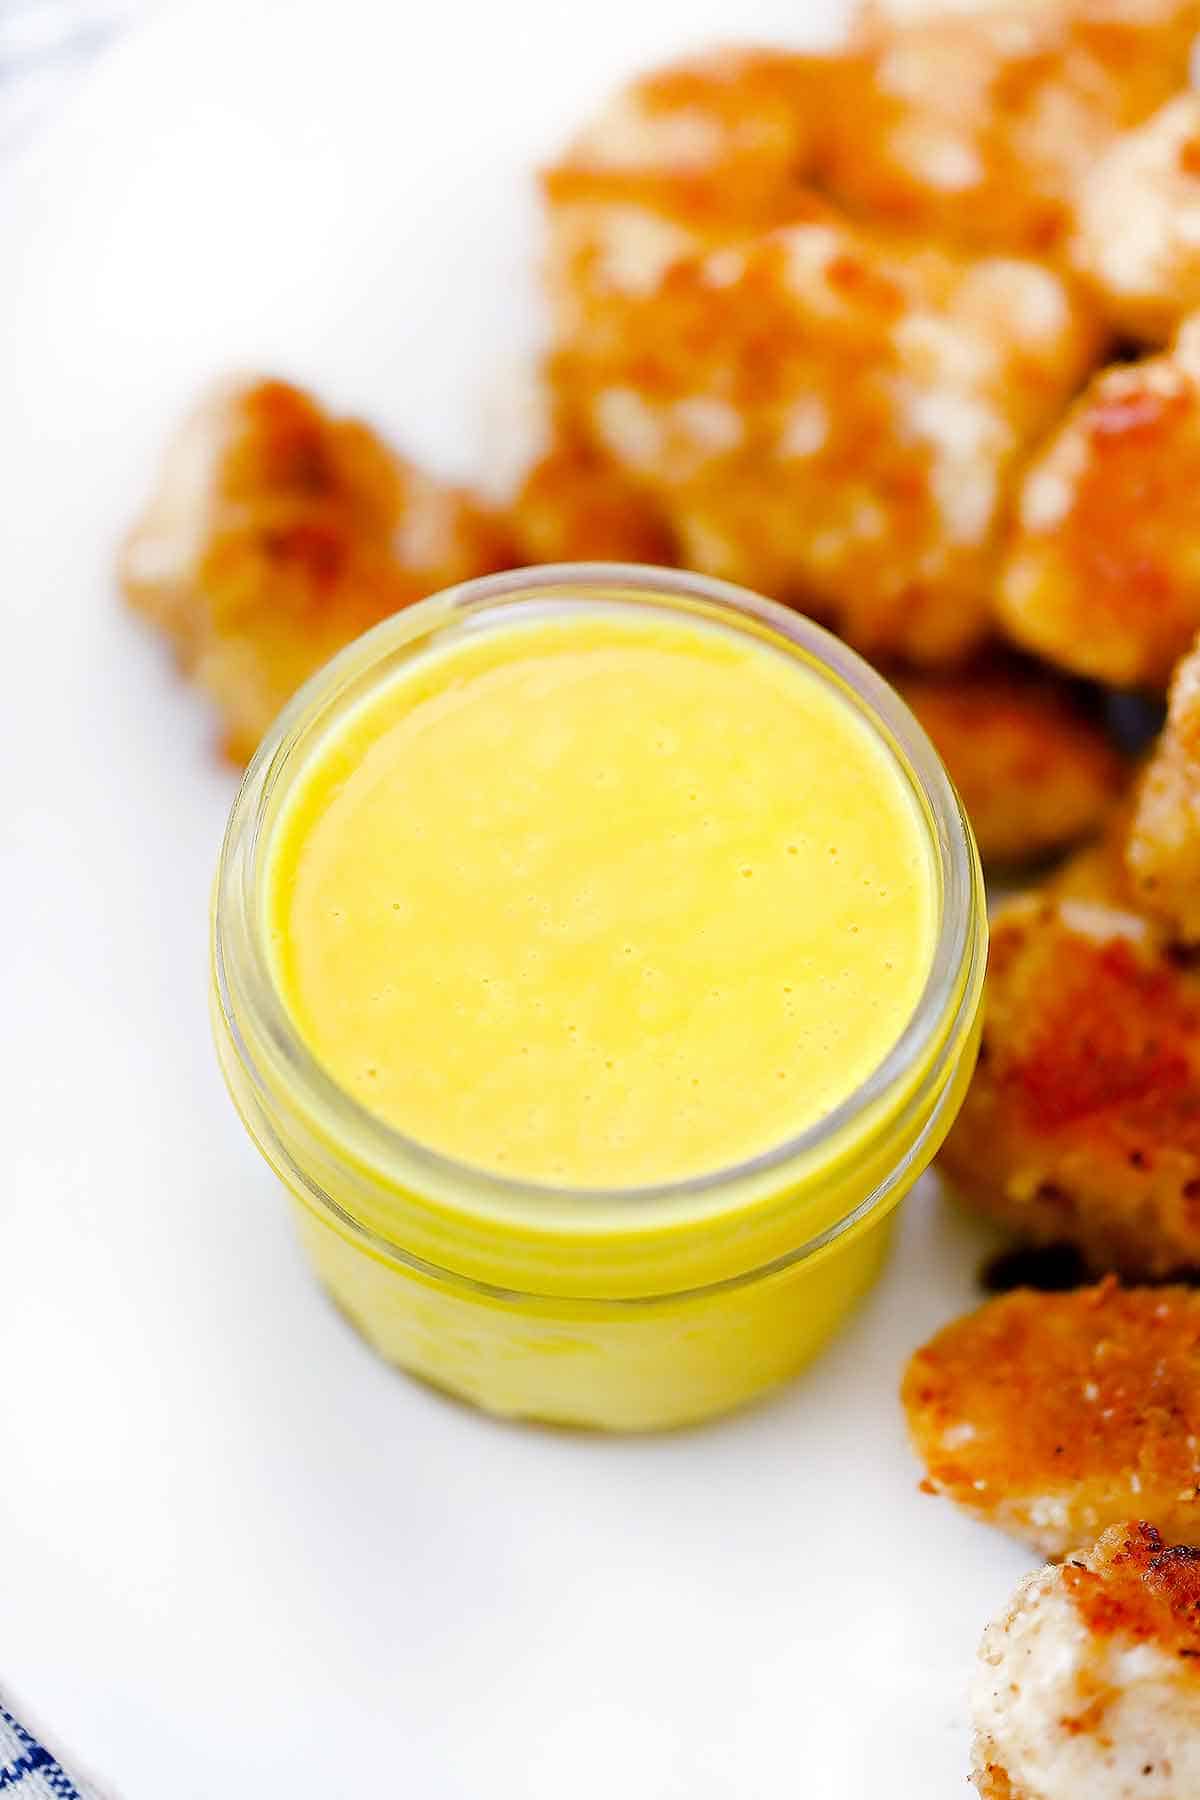 Homemade honey mustard sauce on a plate with chicken nuggets.